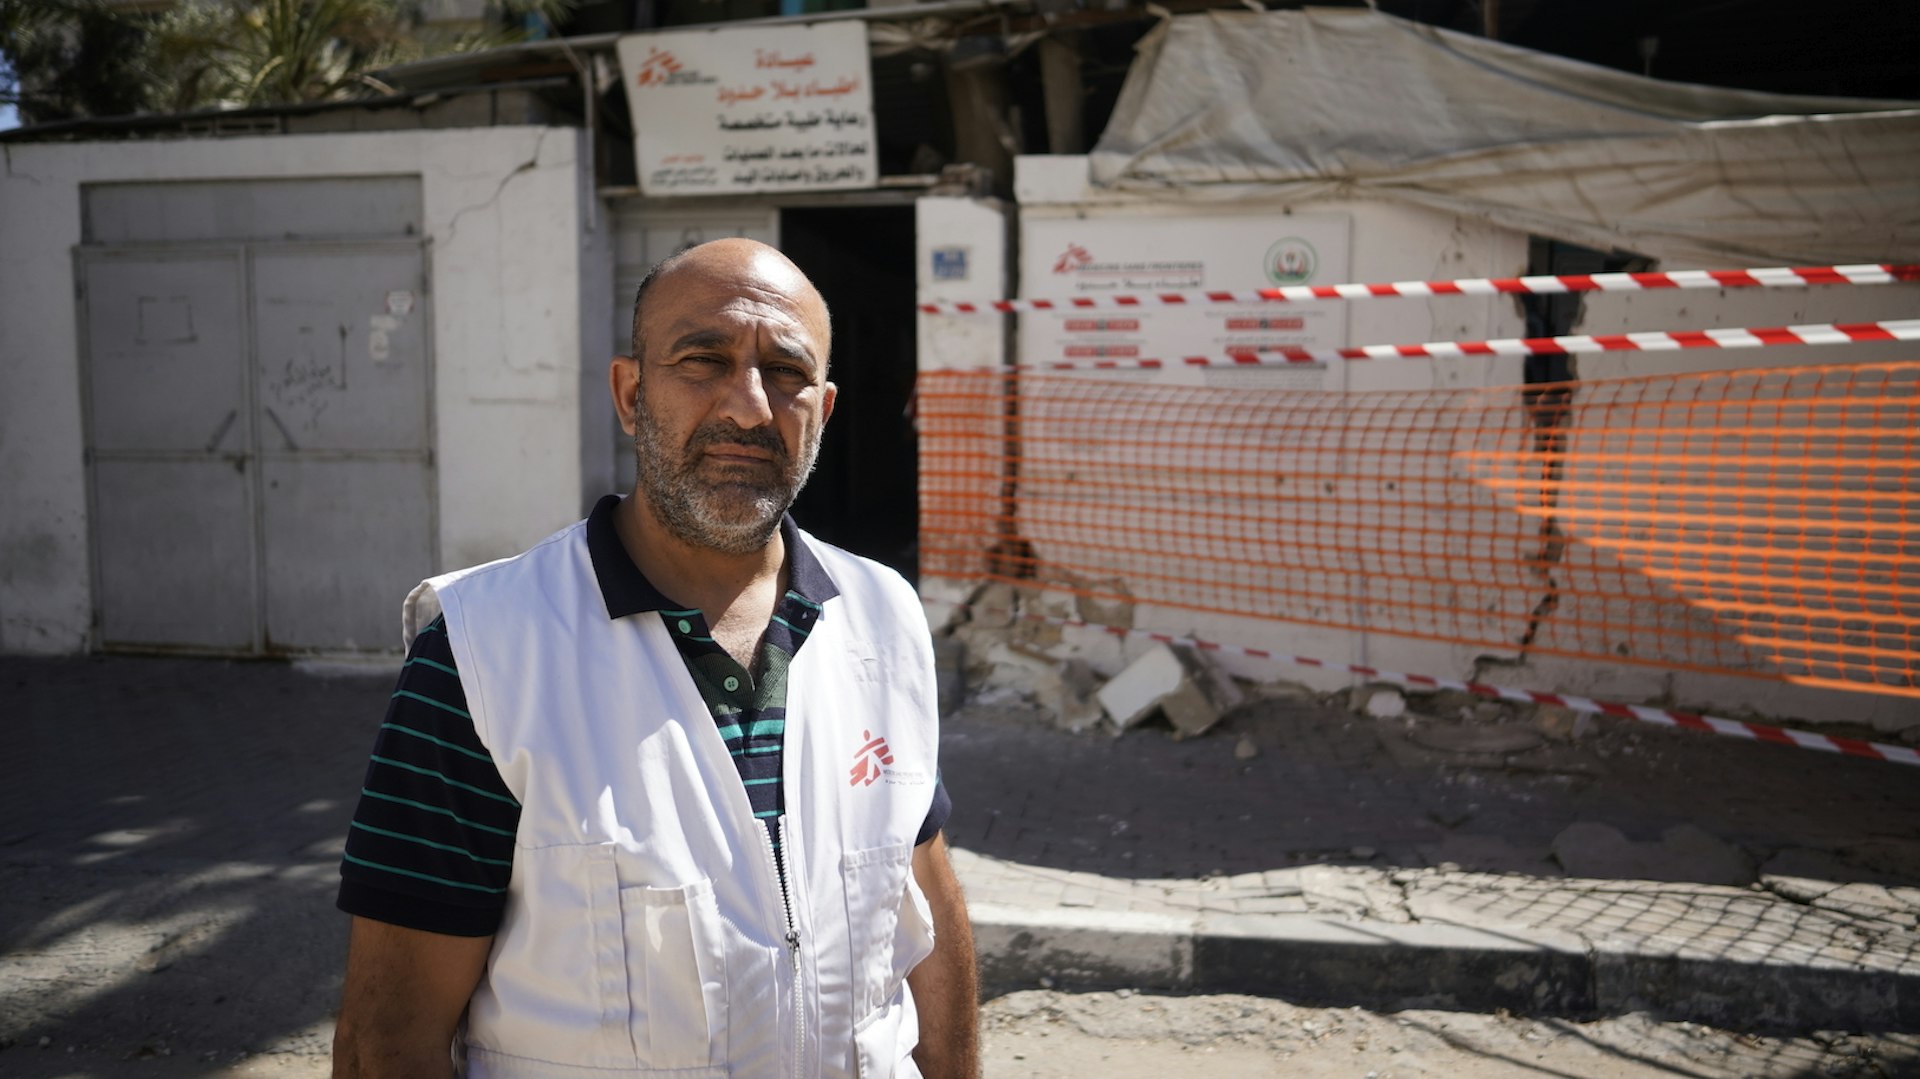 A Gaza resident on life after the ceasefire